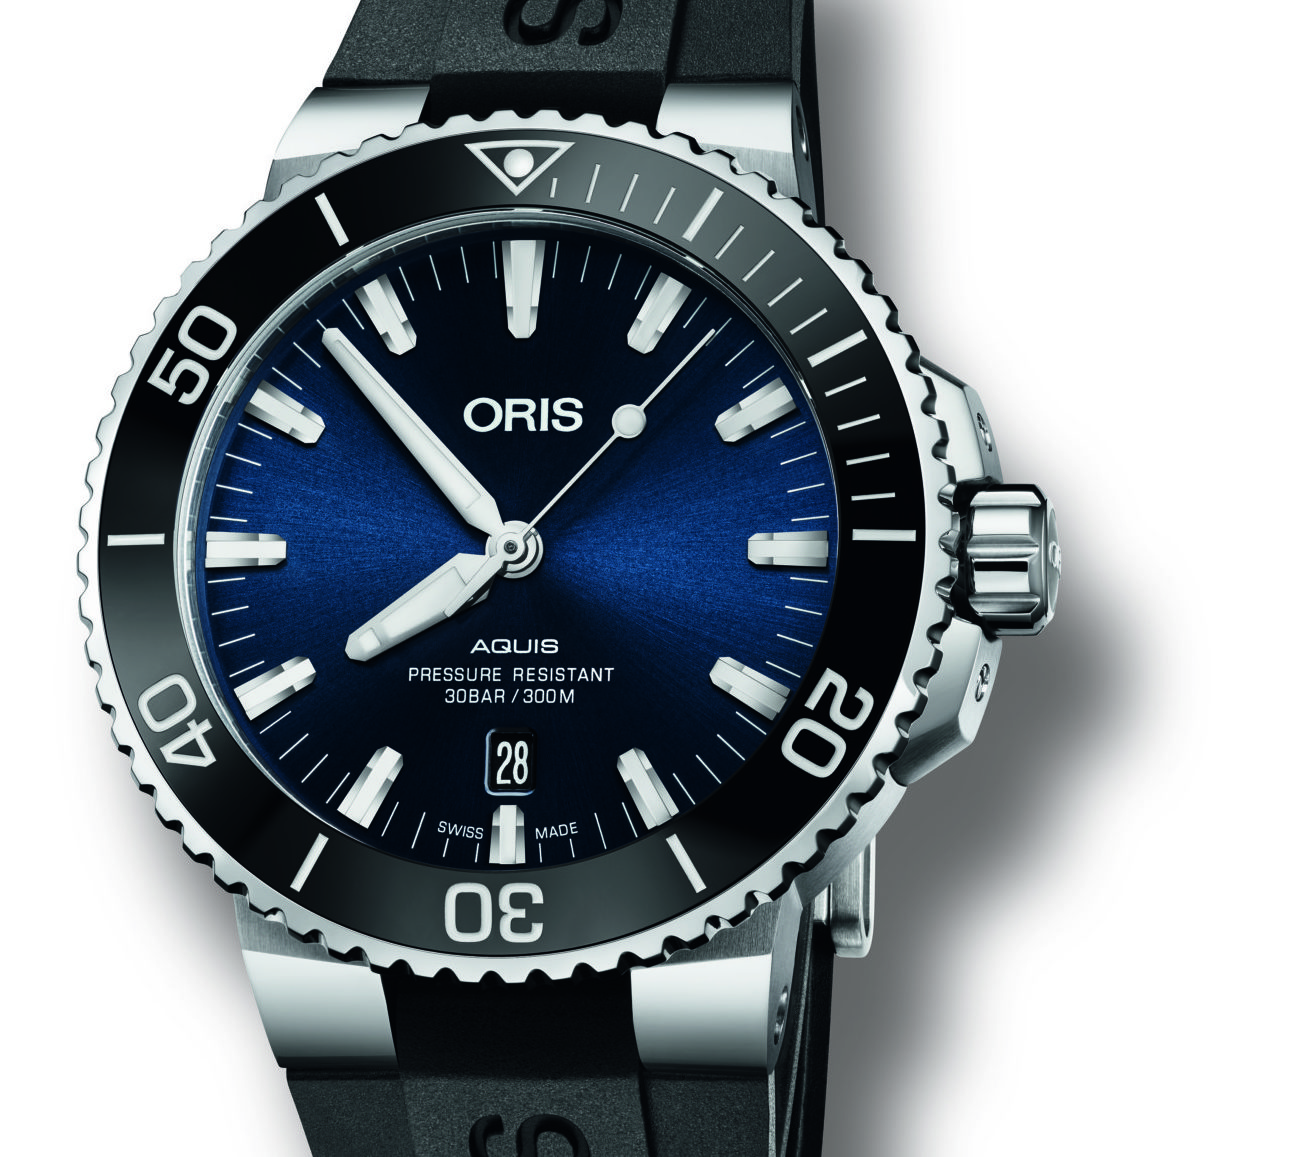 The 2017 oris aquis date delivers practical enhancements with its uni-directional bezel now easier to grip thanks to a small gap introduced between the case and the body, allowing greater purchase.